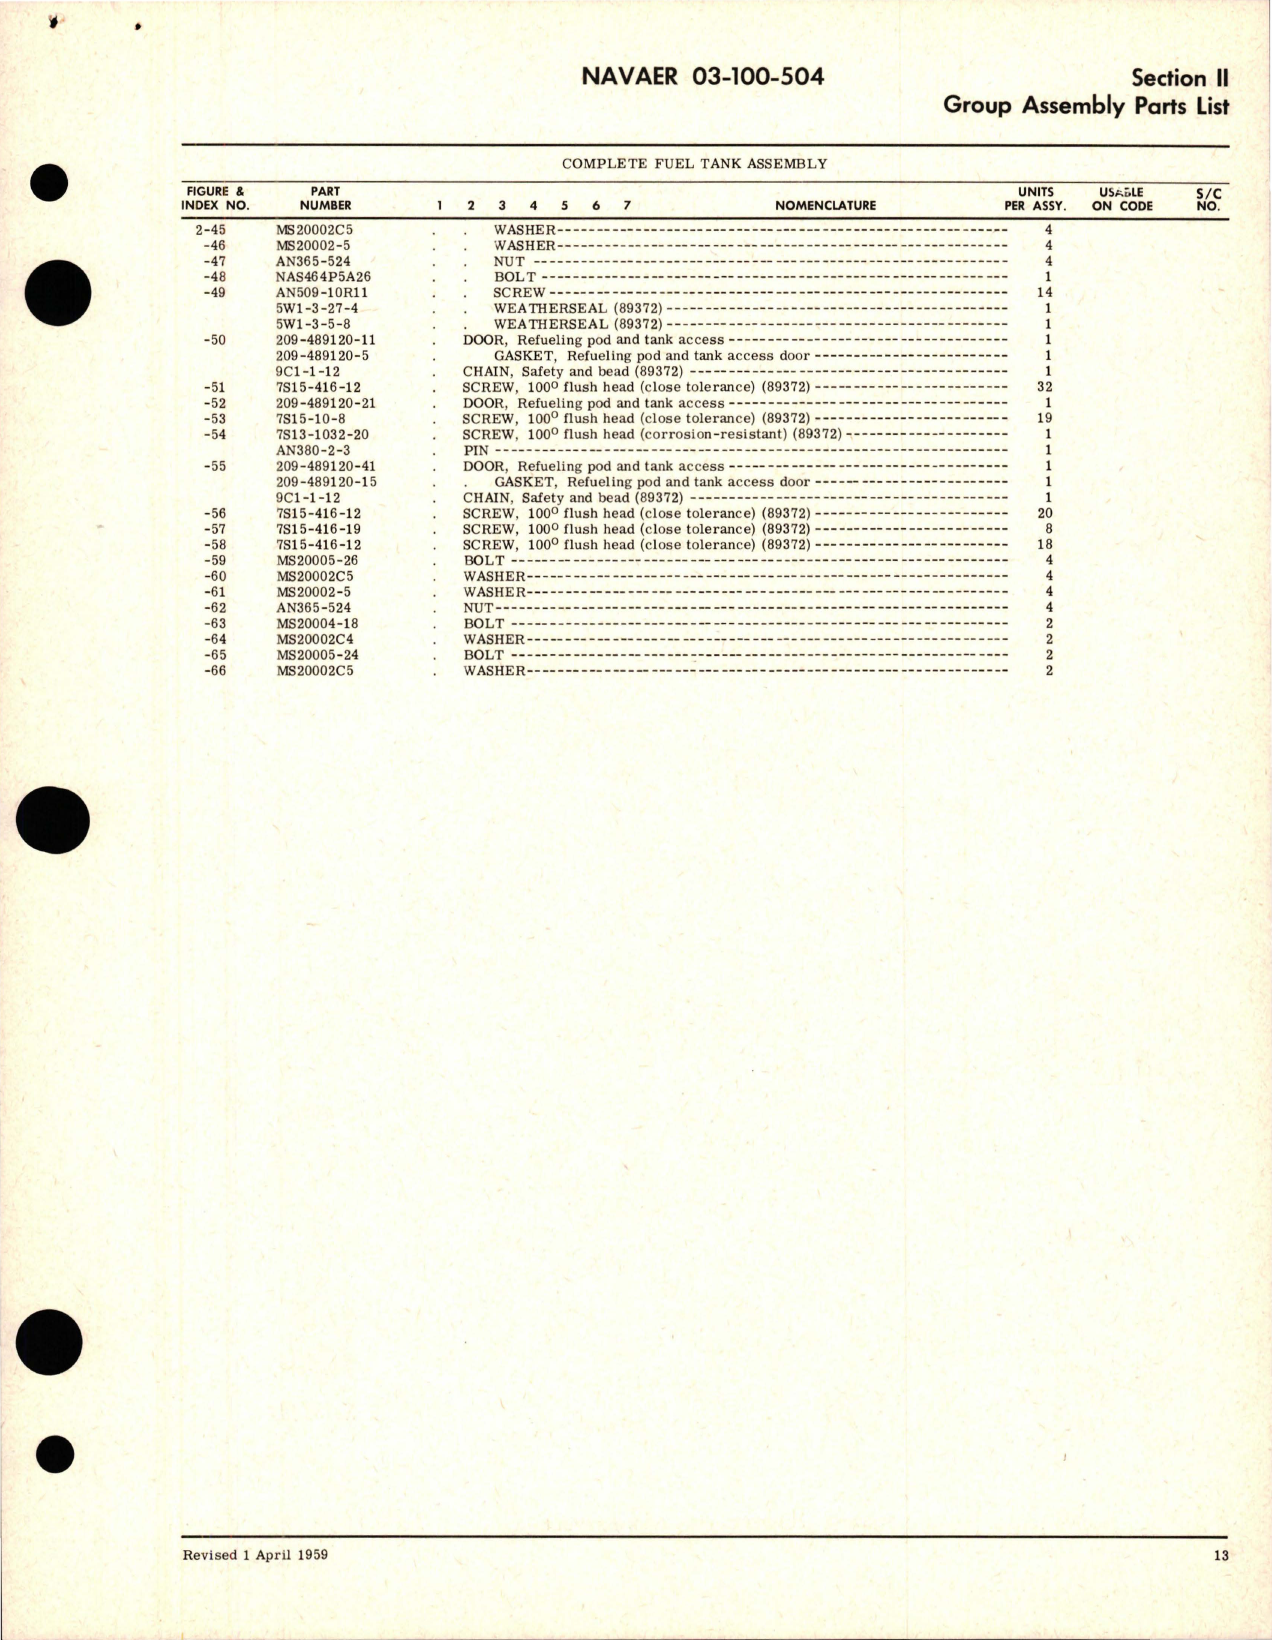 Sample page 7 from AirCorps Library document: Illustrated Parts Breakdown for In-Flight Refueling Tanker Package (Buddy Tanker) - Part 209-48901